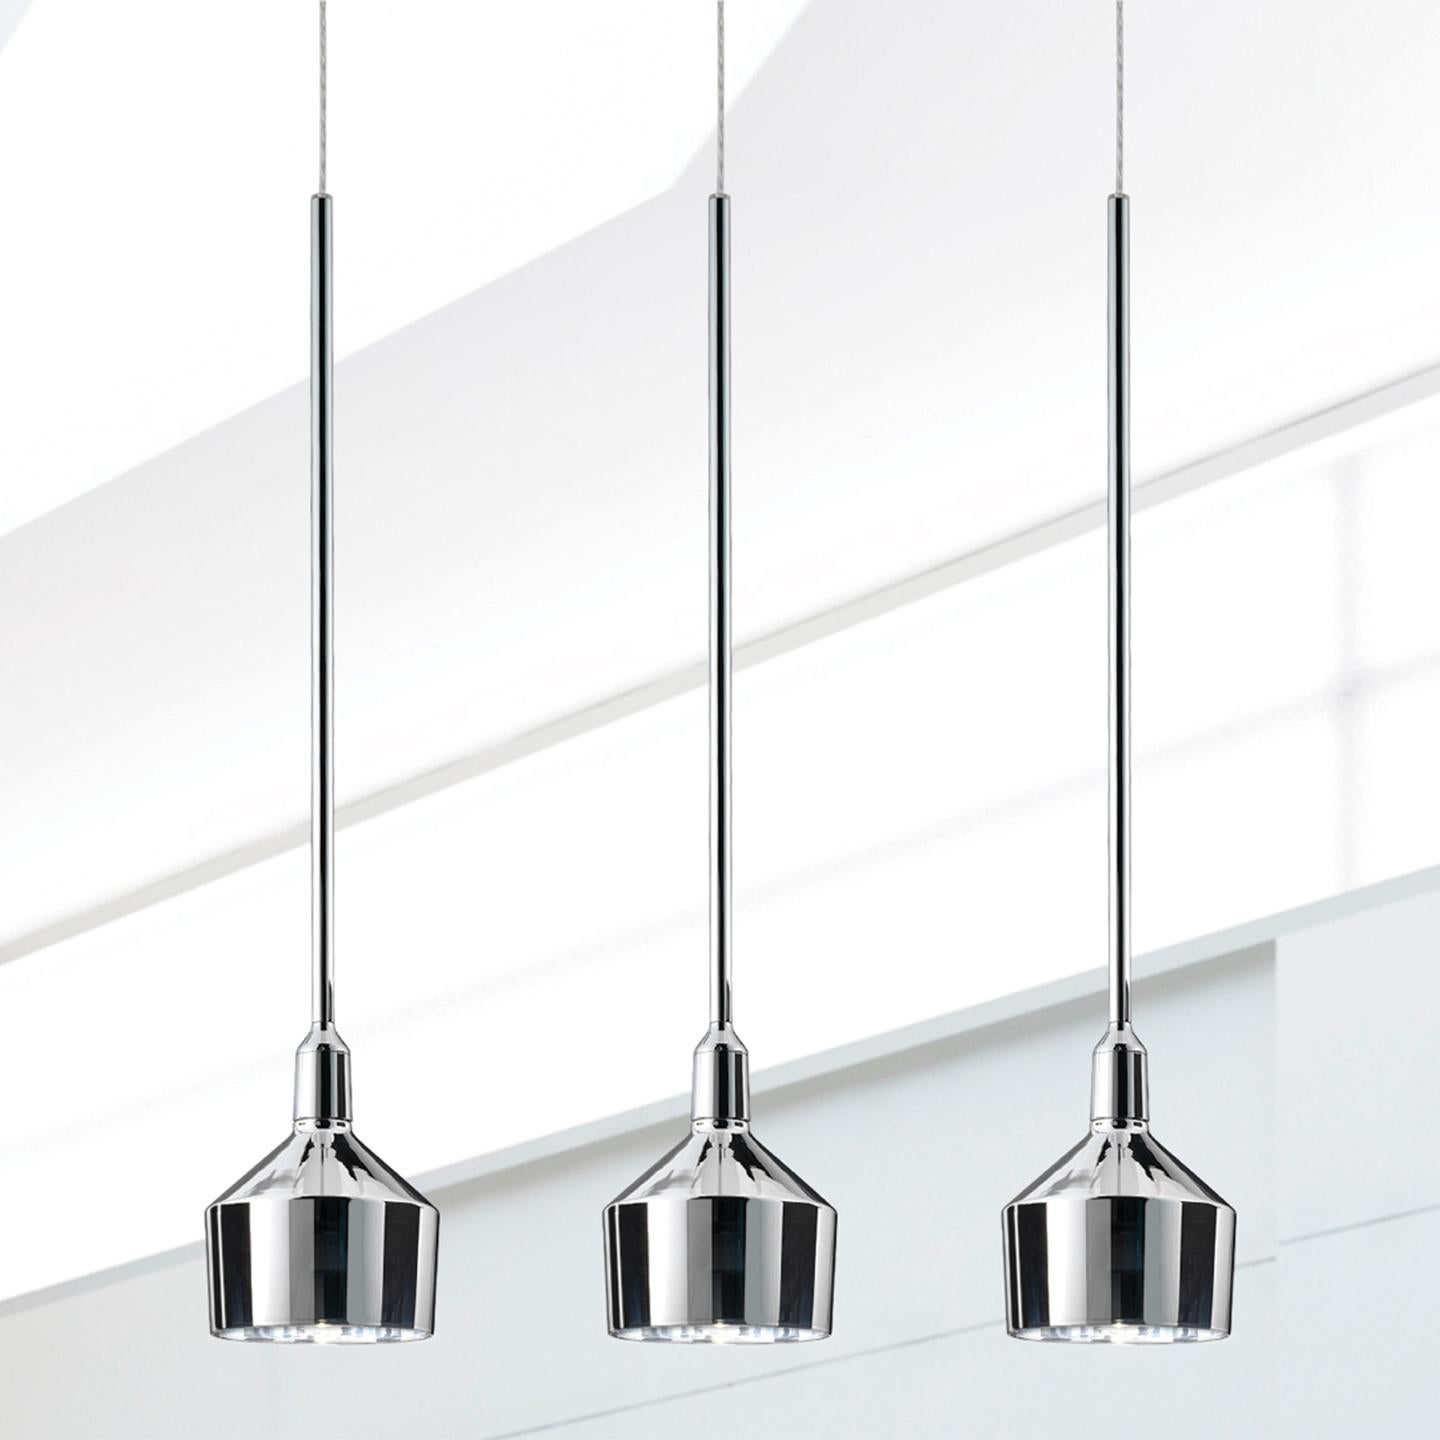 Arik Levy designed the Beamer Pendant in 2013 to be a clever, multivariable pendant system. While the Beamer Pendant looks great as a standalone, the versatile pendant can be customized into three and five multipoint systems and comes in two sizes.